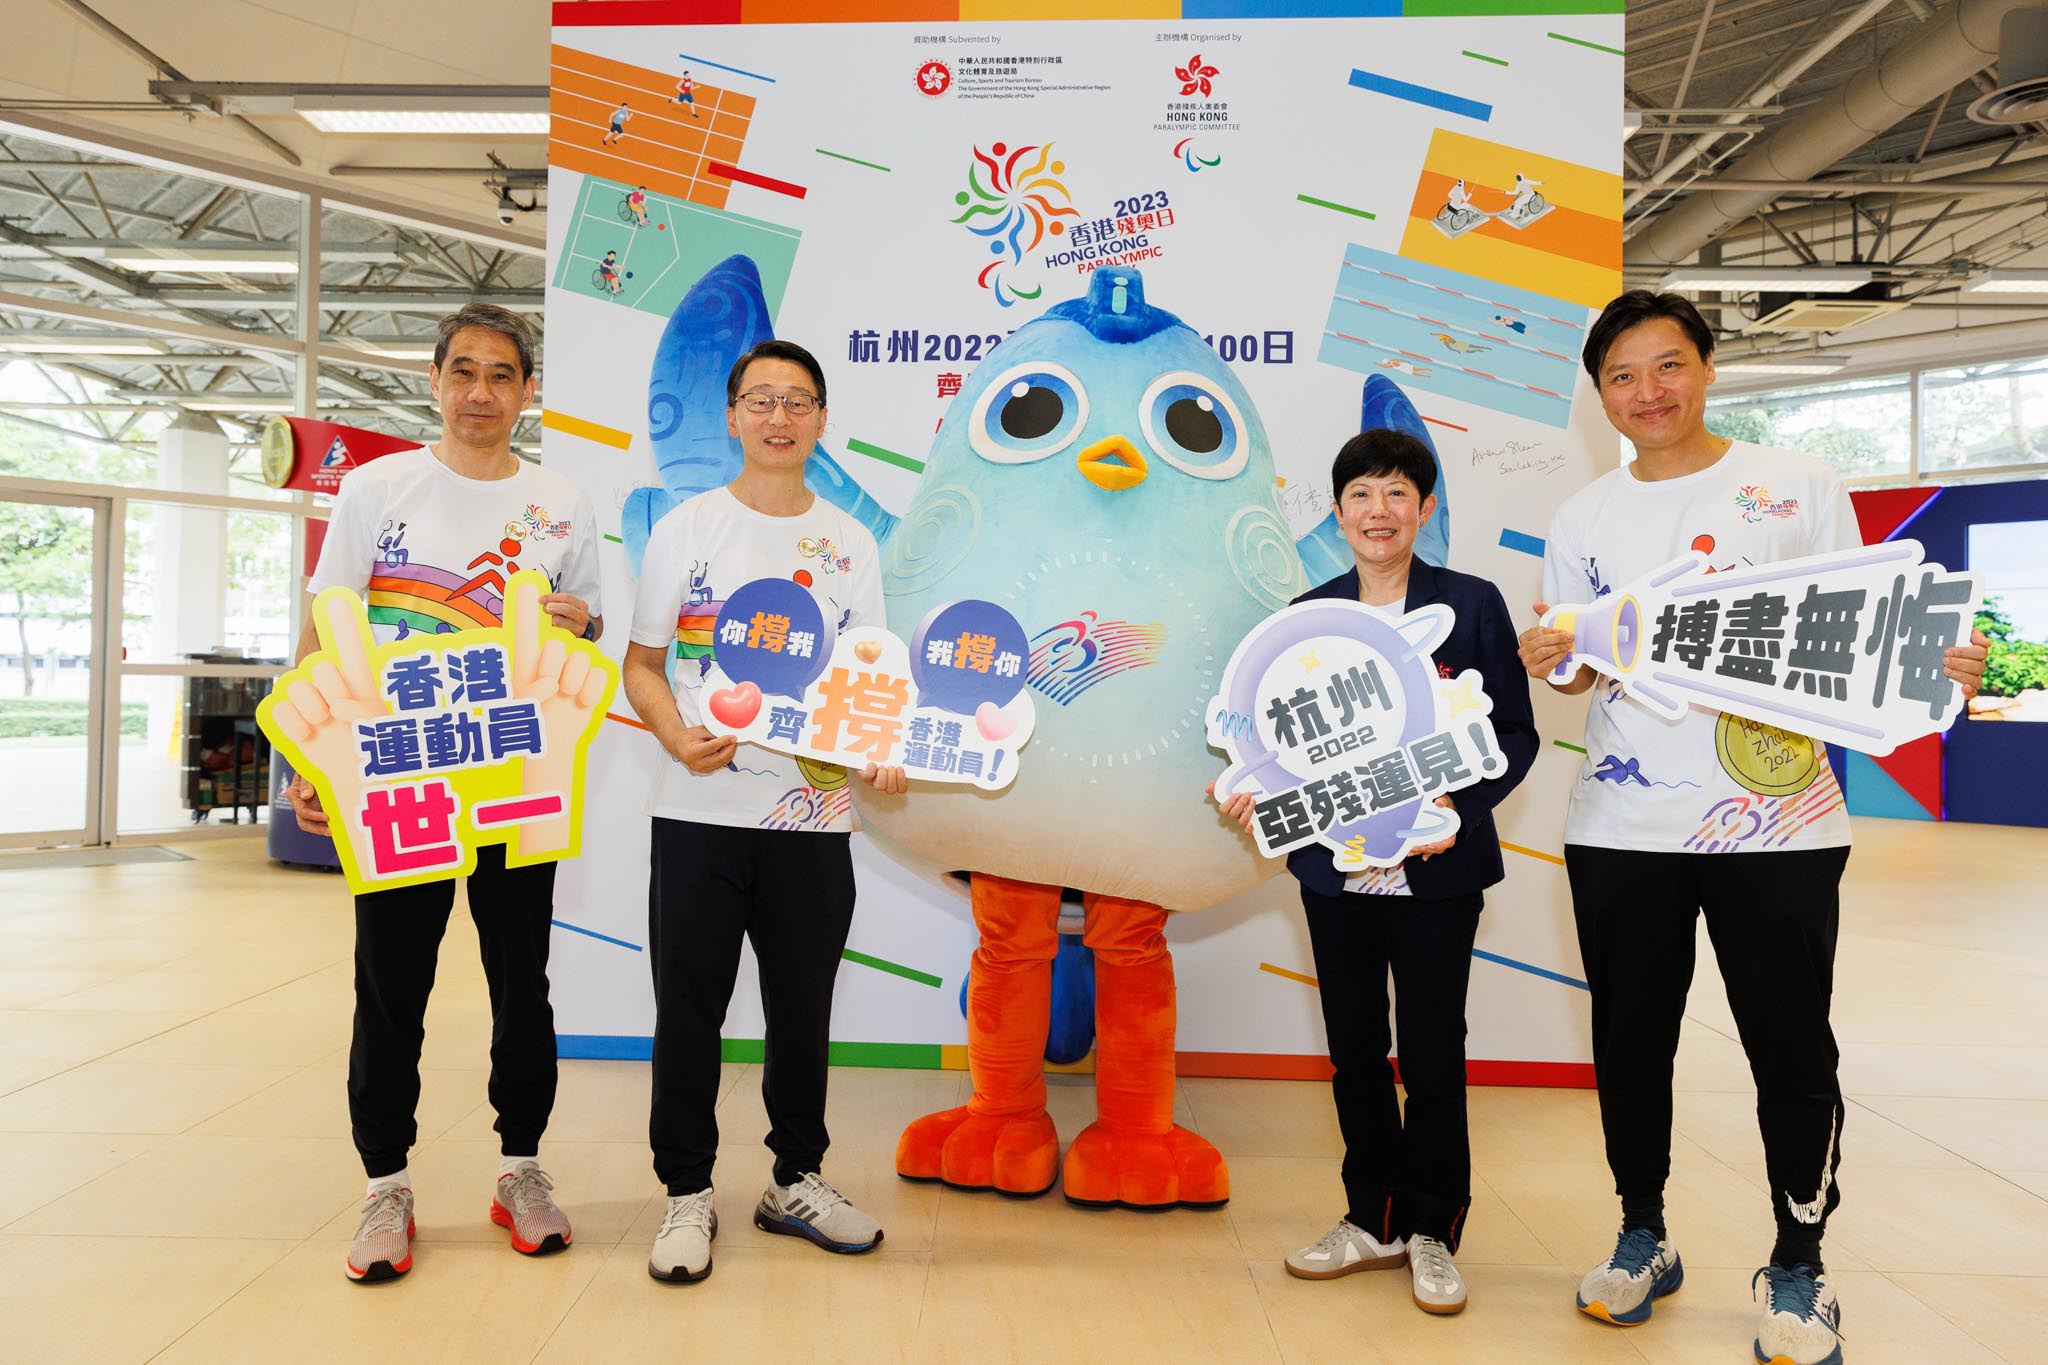 Embracing the theme of the 100 Days Countdown to Hangzhou 2022 Asian Para Games, the event showcased memorabilia from the games and past Asian Para Games medals. The Hangzhou 2022 Asian Para Games mascot "Fei Fei" made its debut appearance in Hong Kong, joining the Hongkongers in the countdown and promoting the spirit of the Asian Para Games while cheering on Hong Kong's athletes in advance.